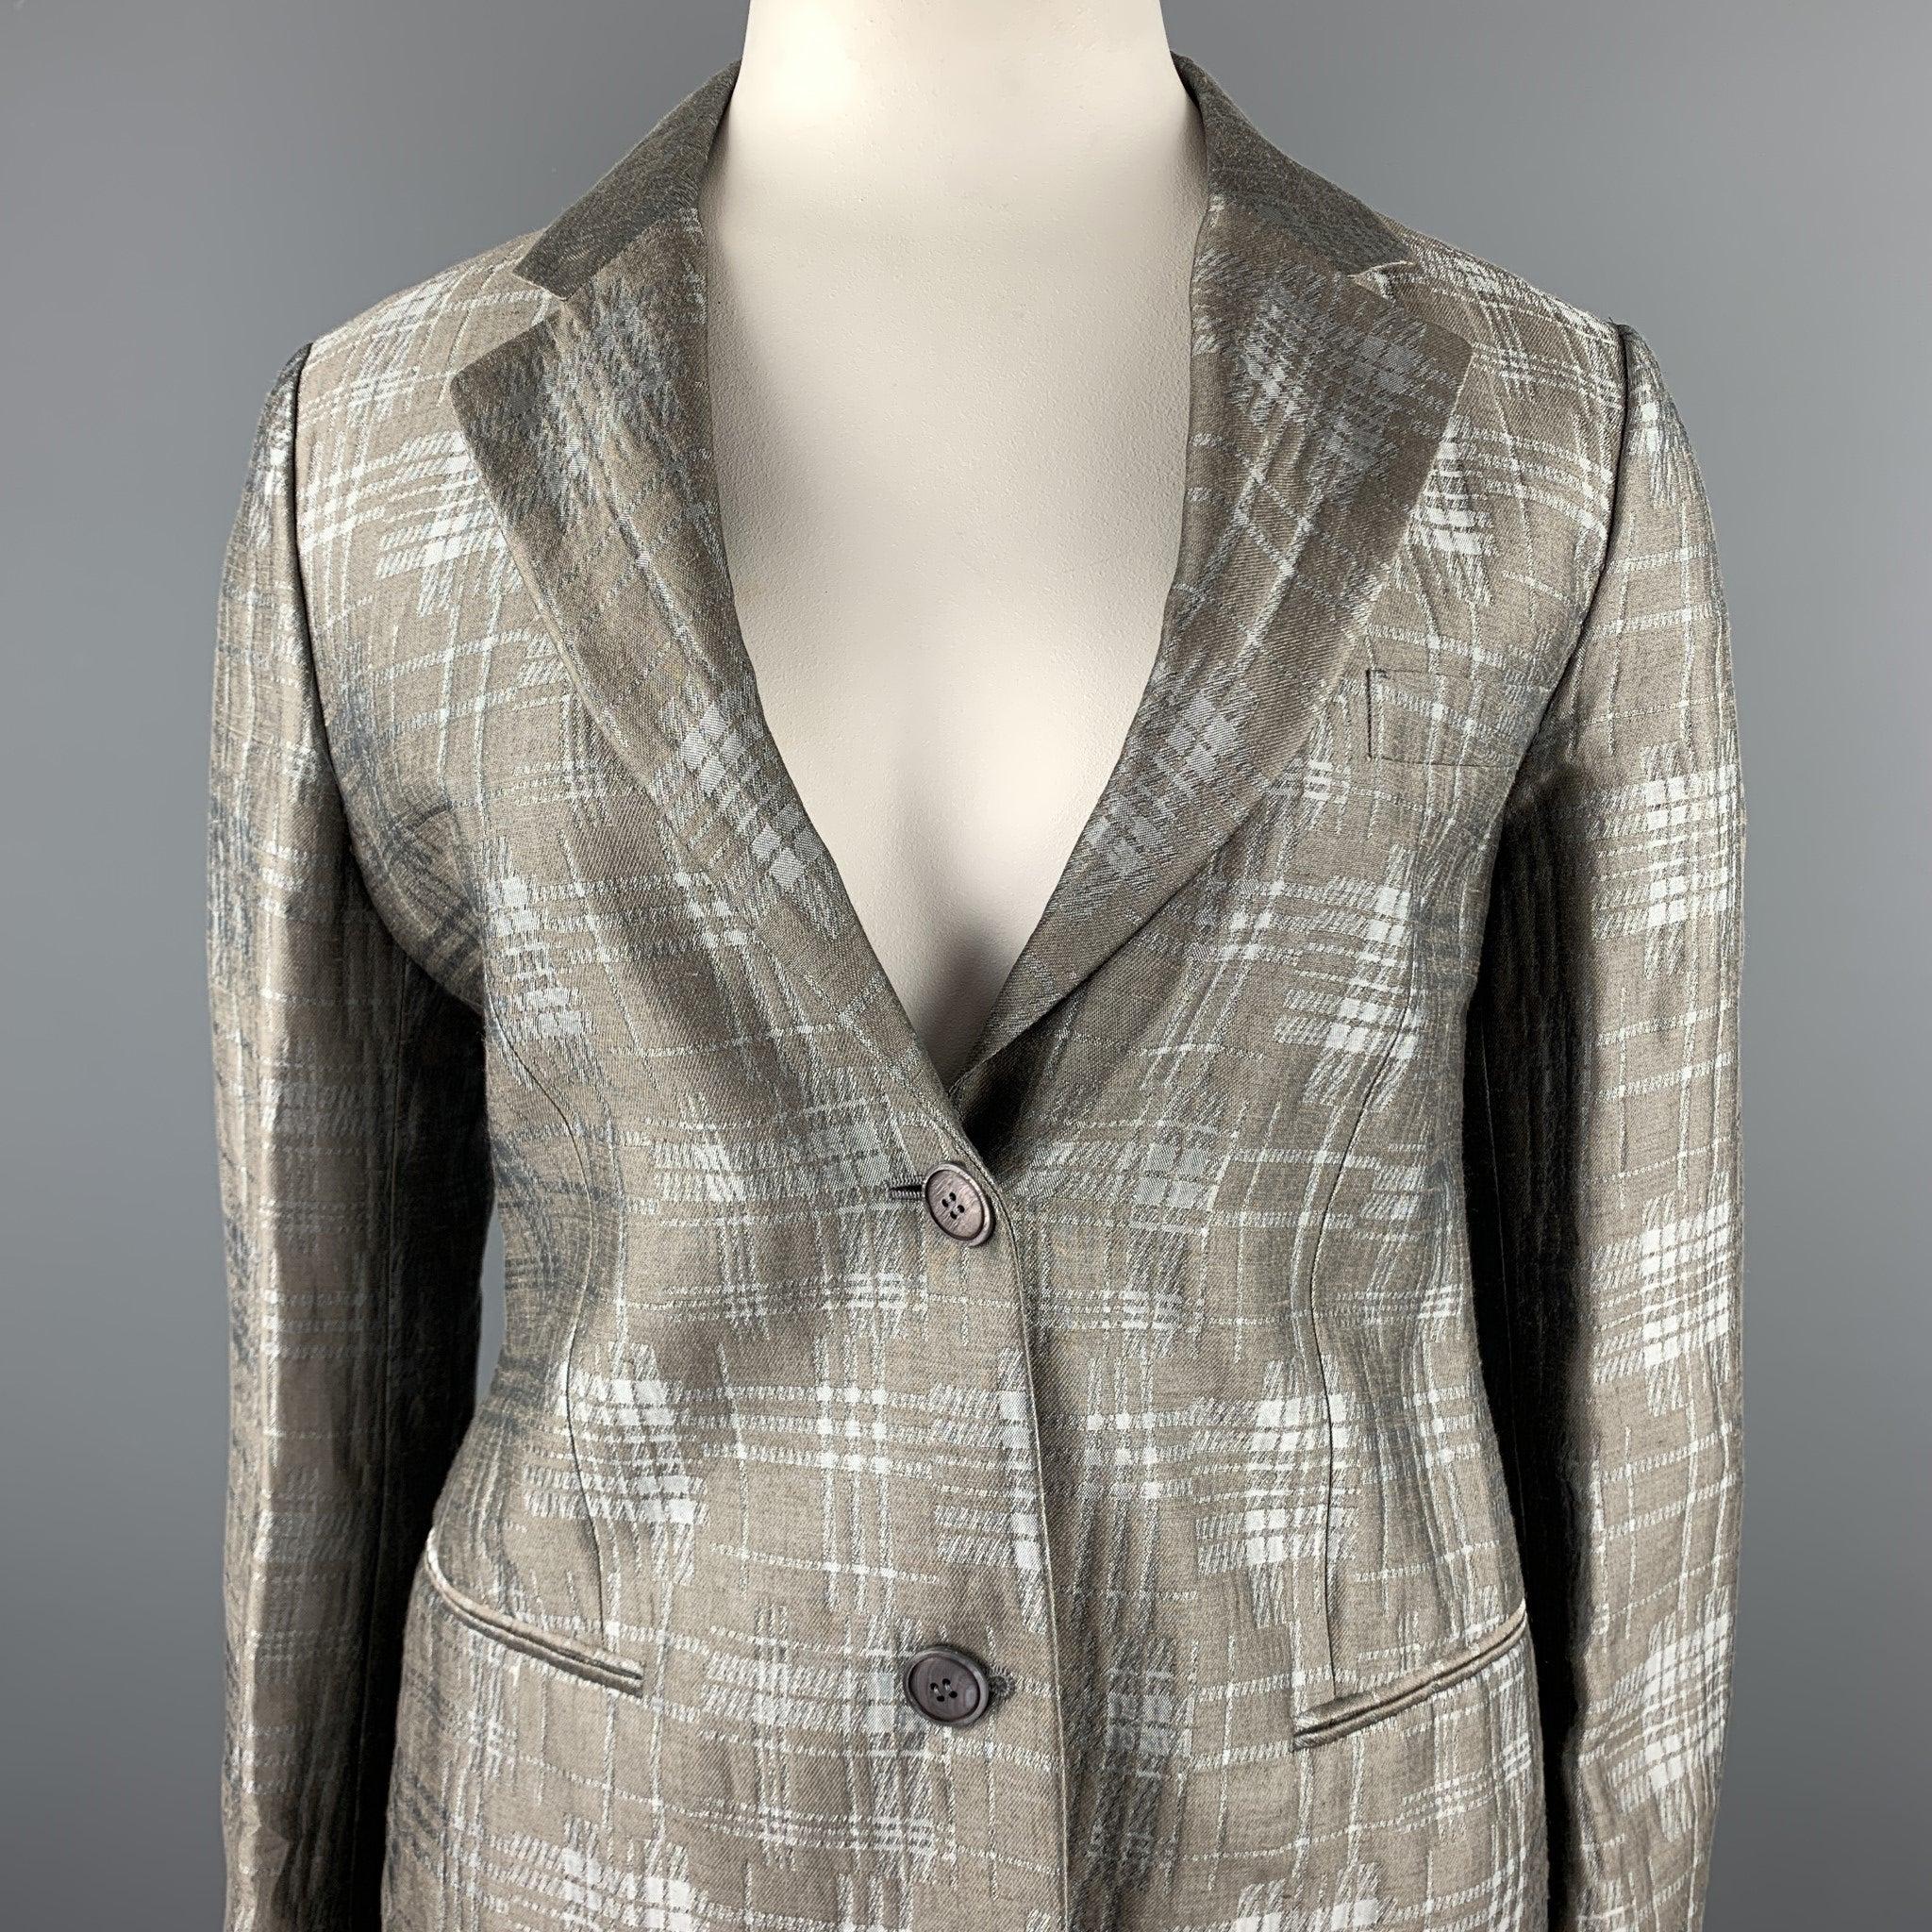 GIORGIO ARMANI blazer comes in a grey plaid jacquard linen blend with a half stripe liner featuring a notch lapel, slit pockets, and a two button closure. Made in Italy.Excellent
Pre-Owned Condition. 

Marked:   IT 46 

Measurements: 
 
Shoulder: